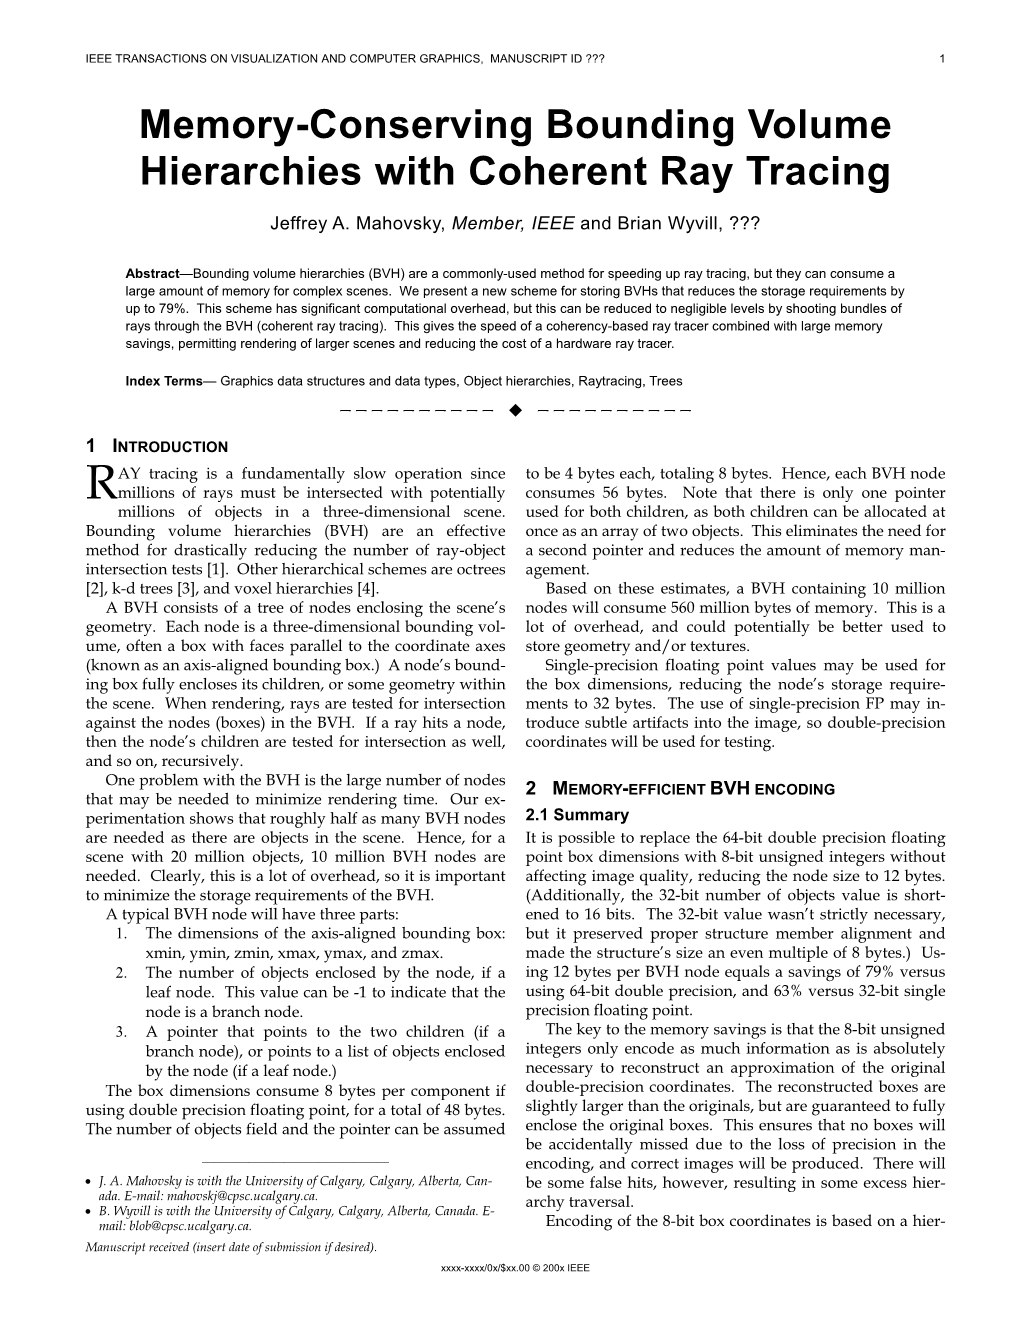 Memory-Conserving Bounding Volume Hierarchies with Coherent Ray Tracing